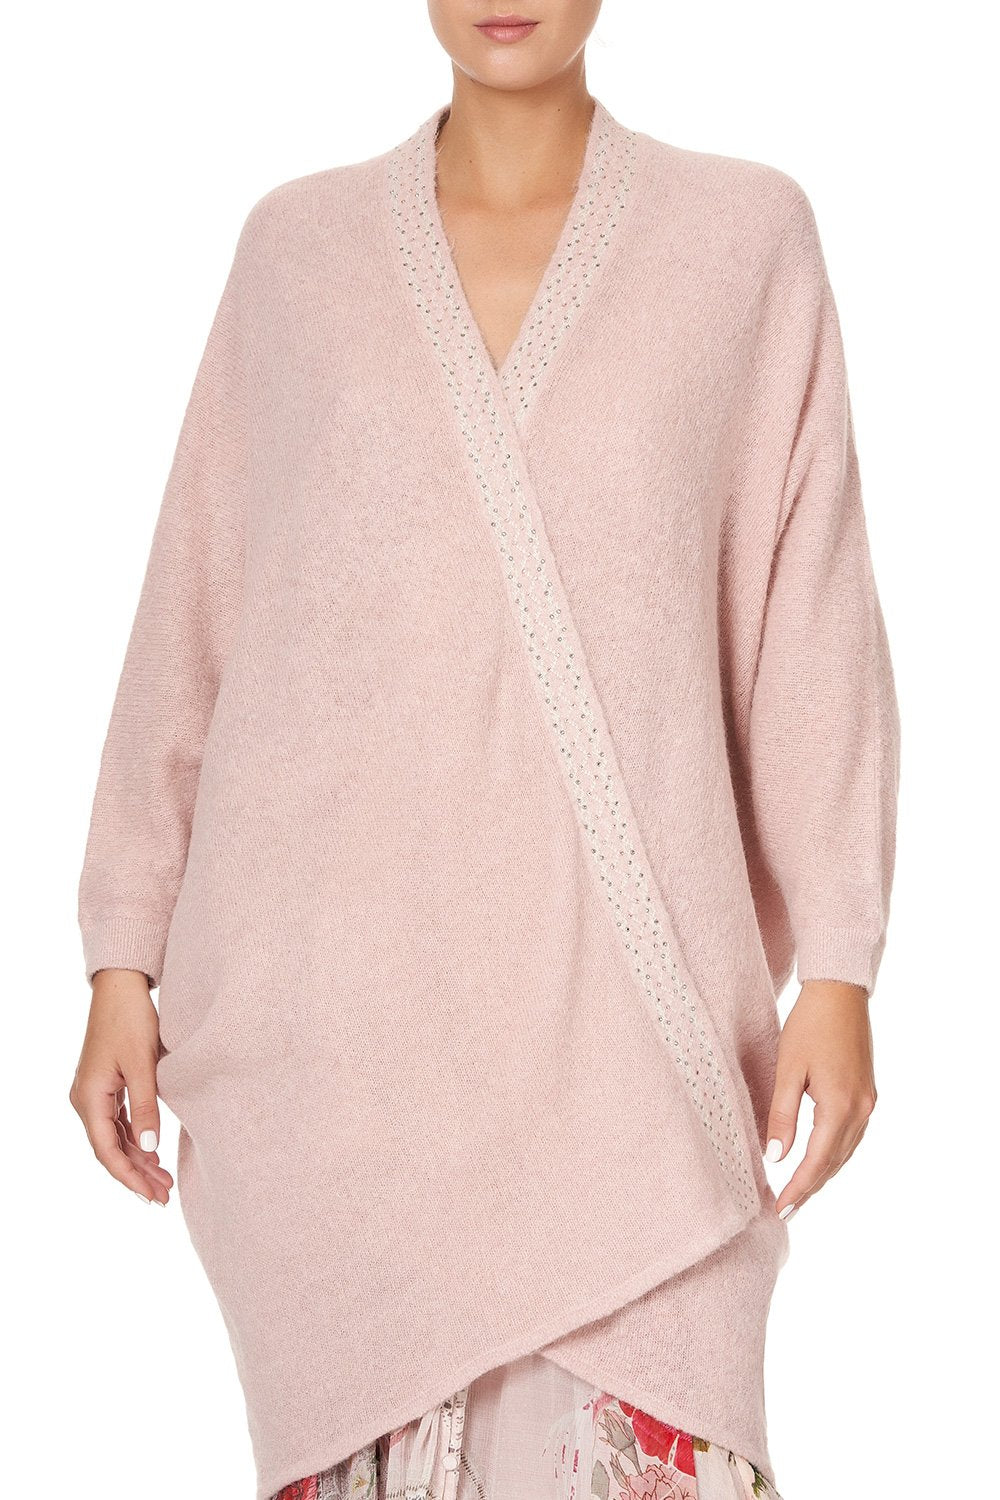 SOFT KNIT PONCHO WITH EMBROIDERY PINK ISTENANYA